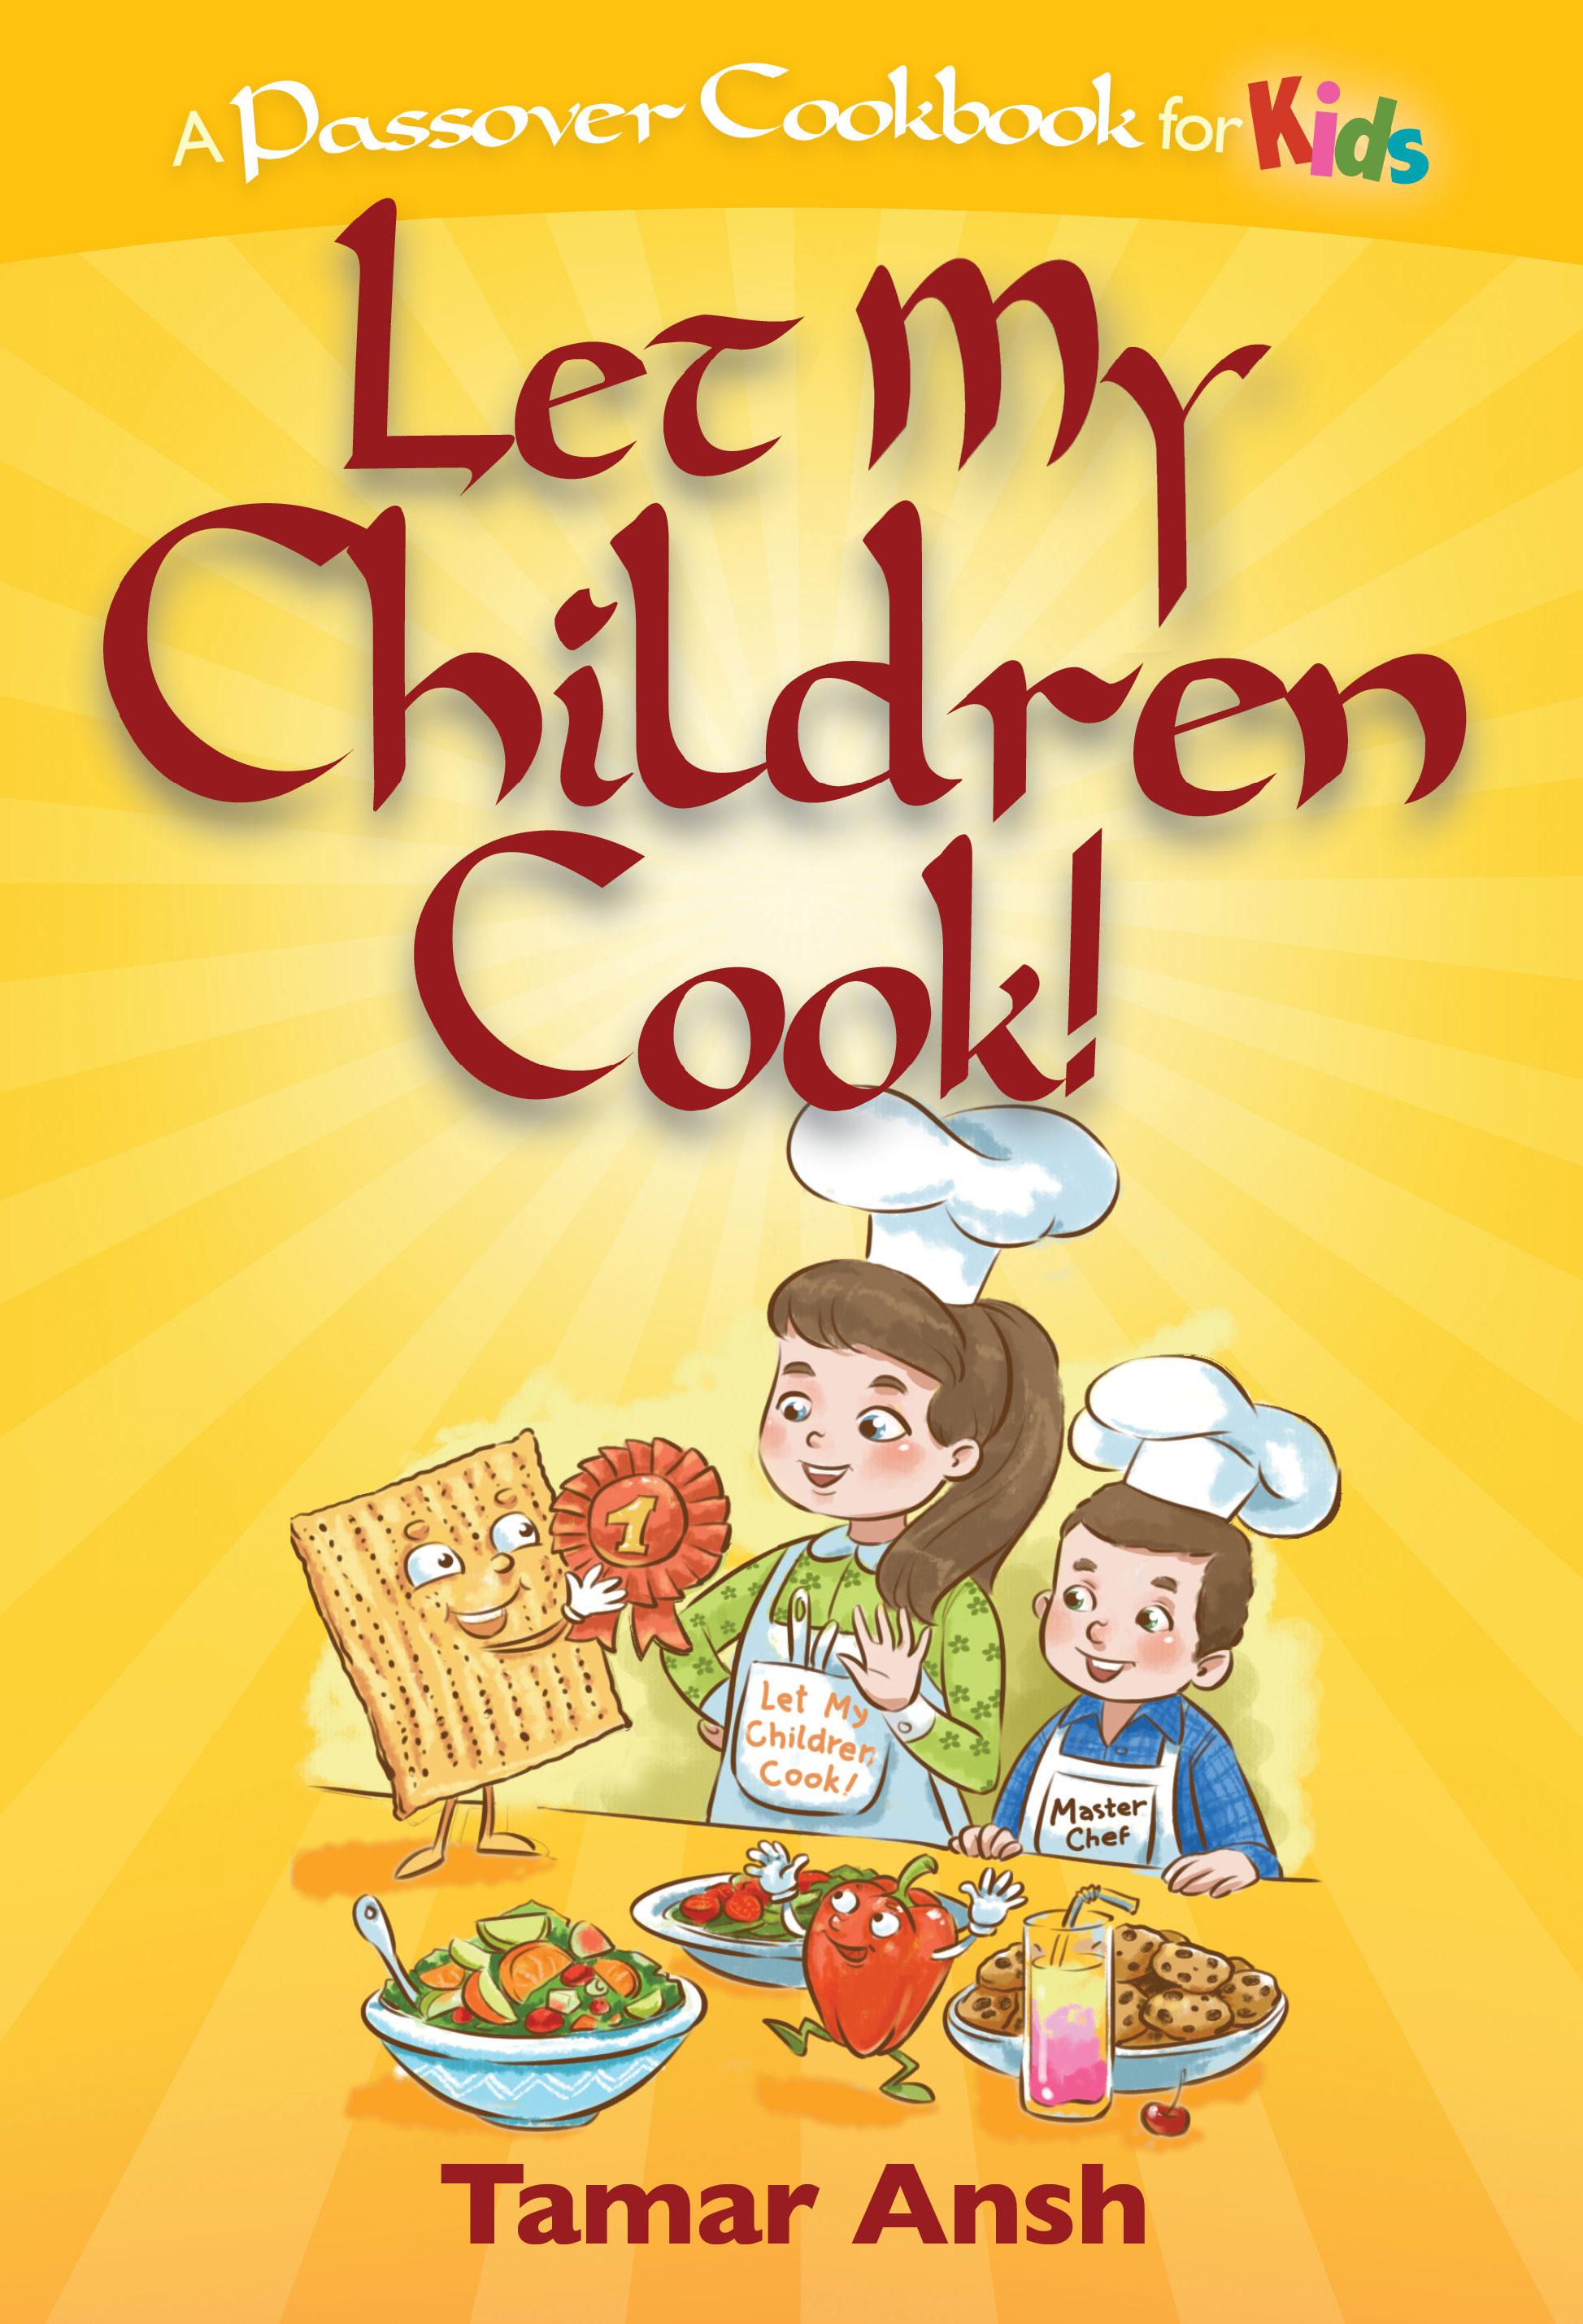 On Not Rushing Things, and a Kids’ Passover Cookbook Giveaway! Rivki